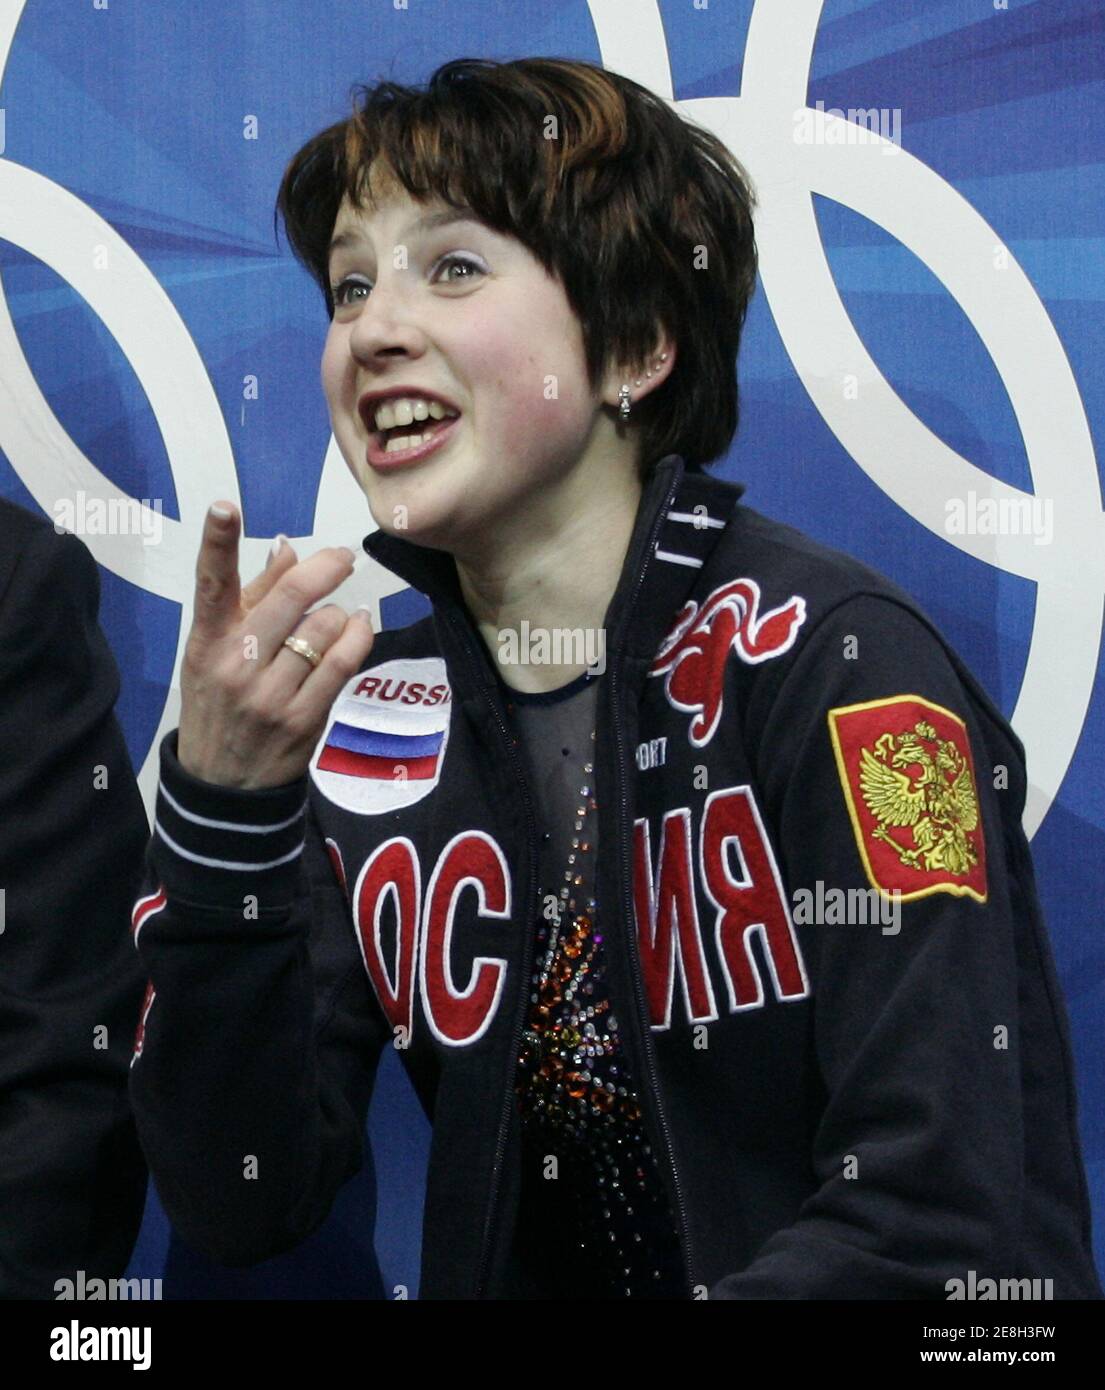 Irina Slutskaya from Russia reacts after the women's short program during the Figure Skating competition at the Torino 2006 Winter Olympic Games in Turin, Italy, February 21, 2006. REUTERS/Andy Clark Stock Photo